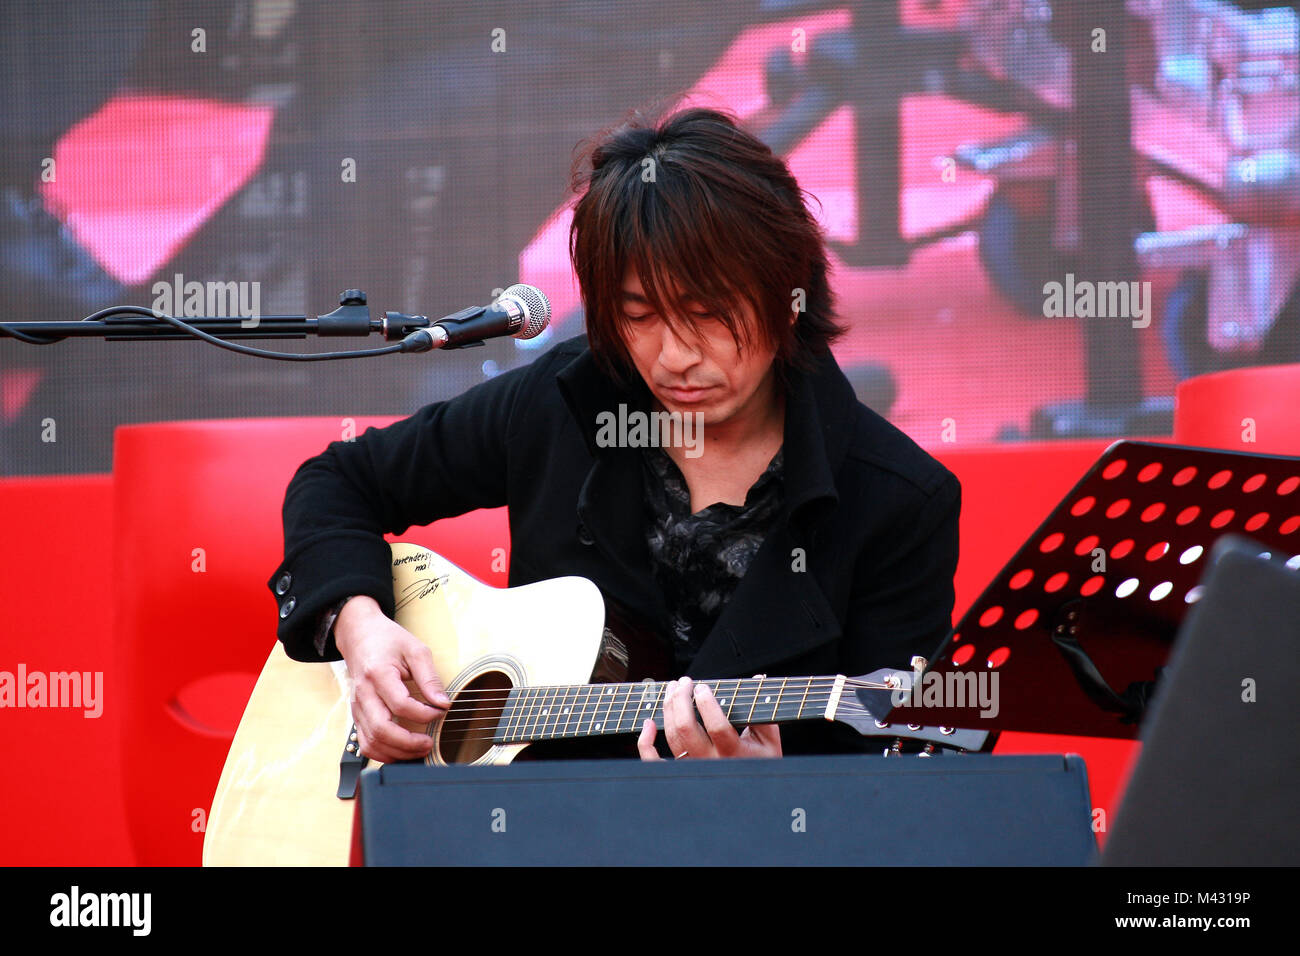 Japanese Guitar High Resolution Stock Photography and Images - Alamy